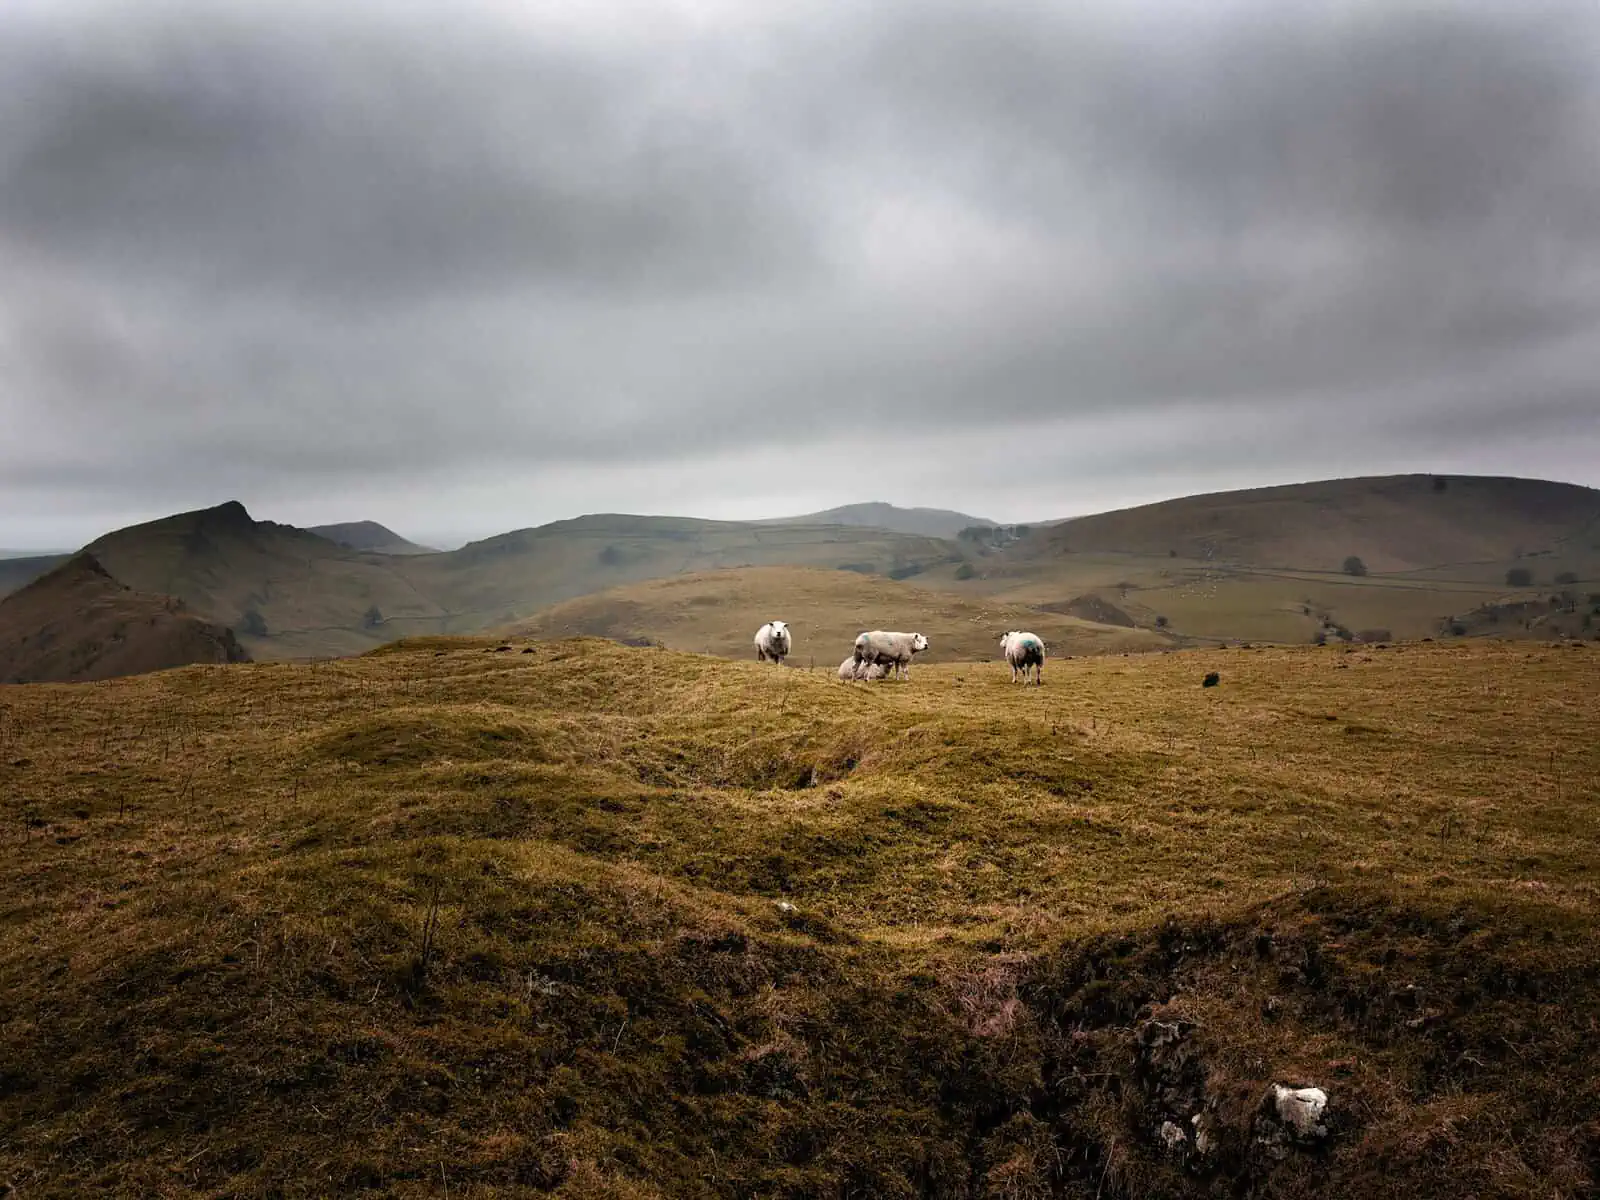 ID: A landscape image. Four sheep stand in a field in the centre of the image - they have white wool. The field they stand in is undulating ground and is a dark green/brown in colour. In the background are hills of all different interesting shapes. The sky is dark and dull - it looks like a stormy day.